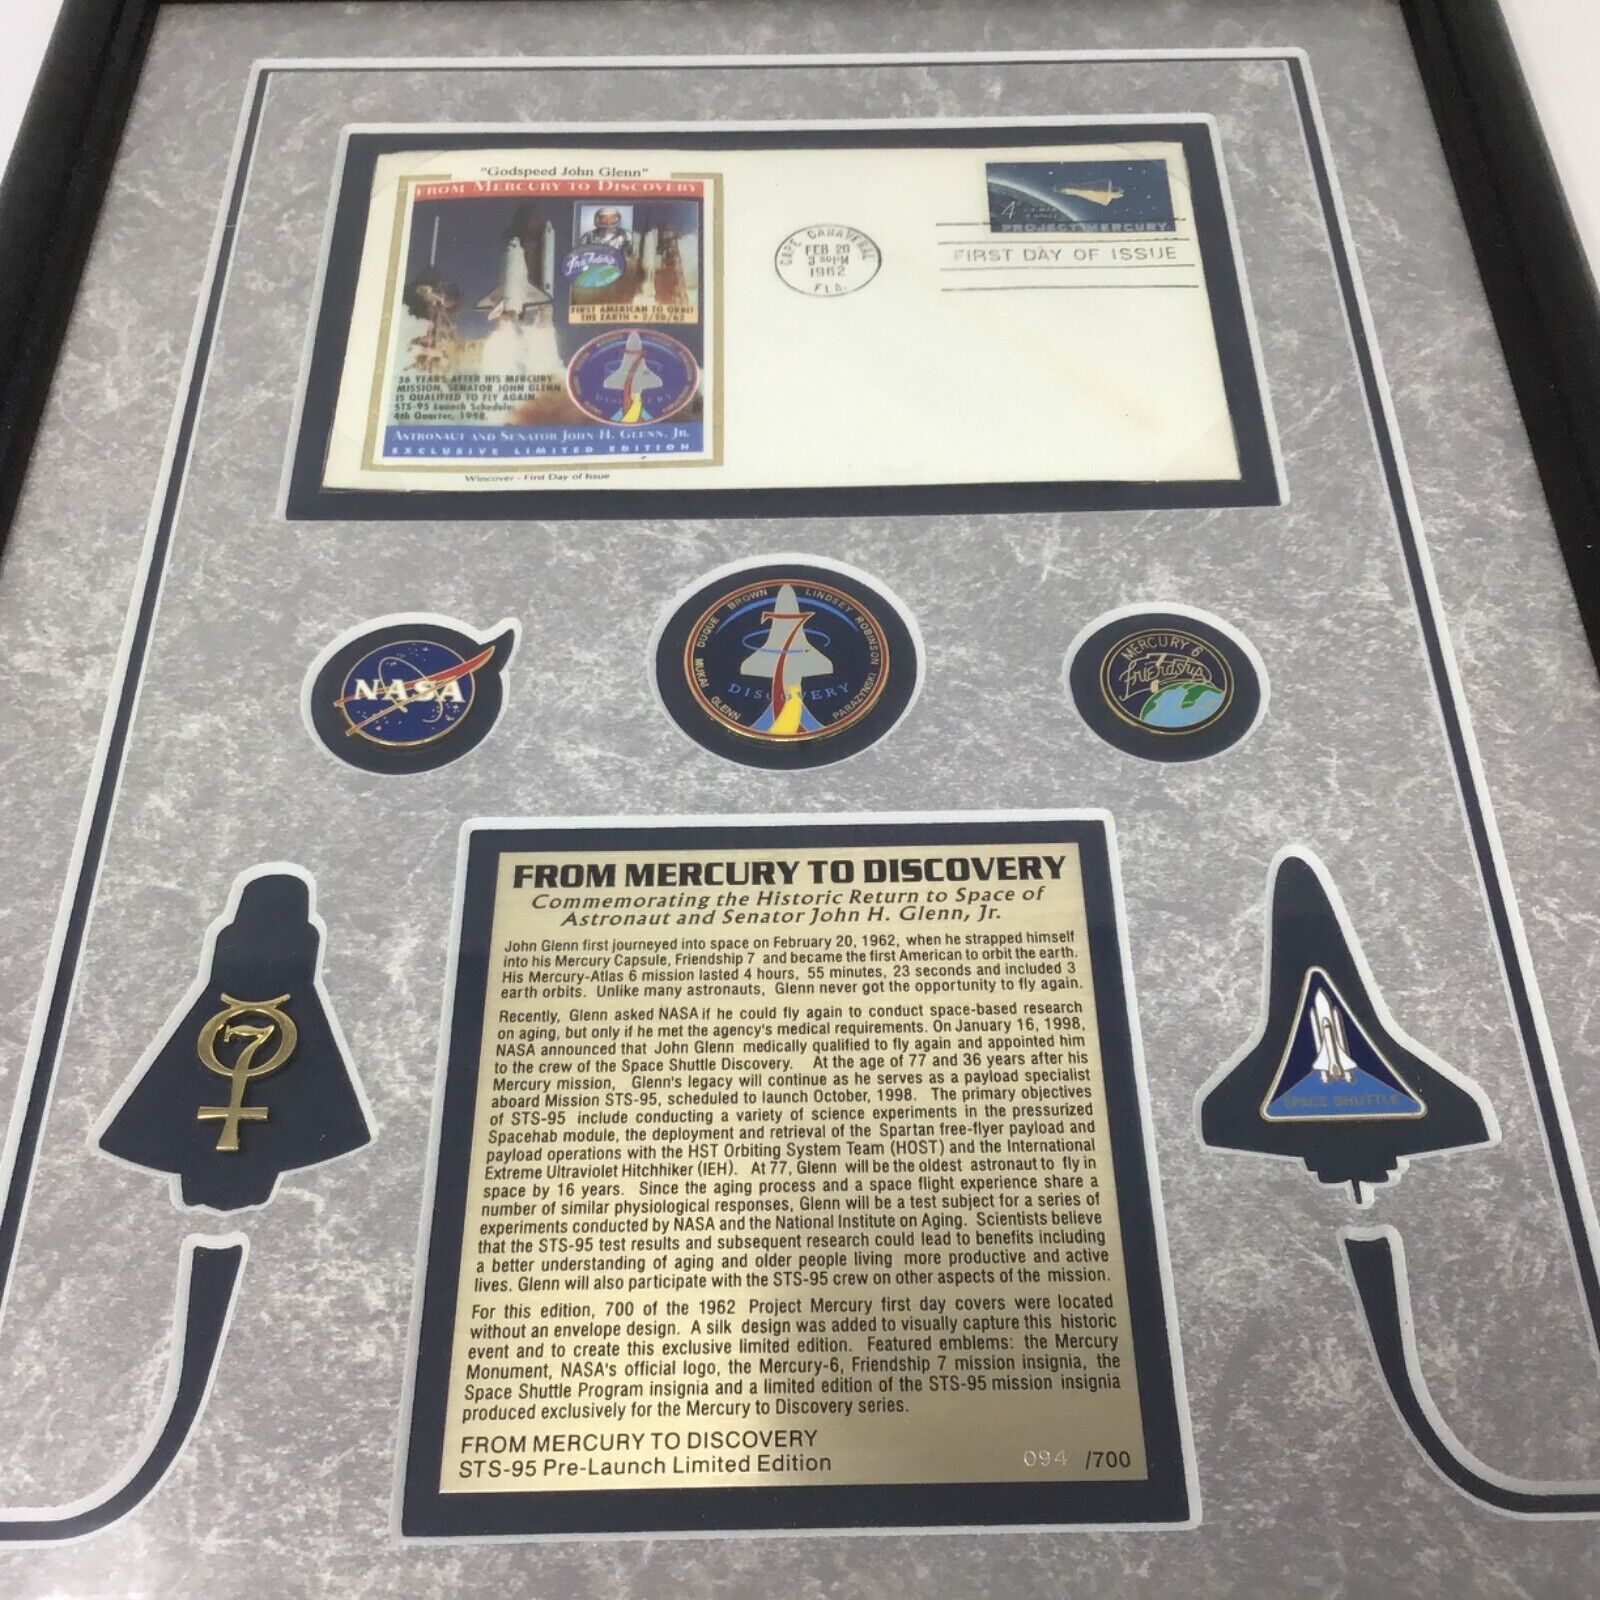 vintage NASA From Mercury to Discovery framed limited edition memorabilia 1998